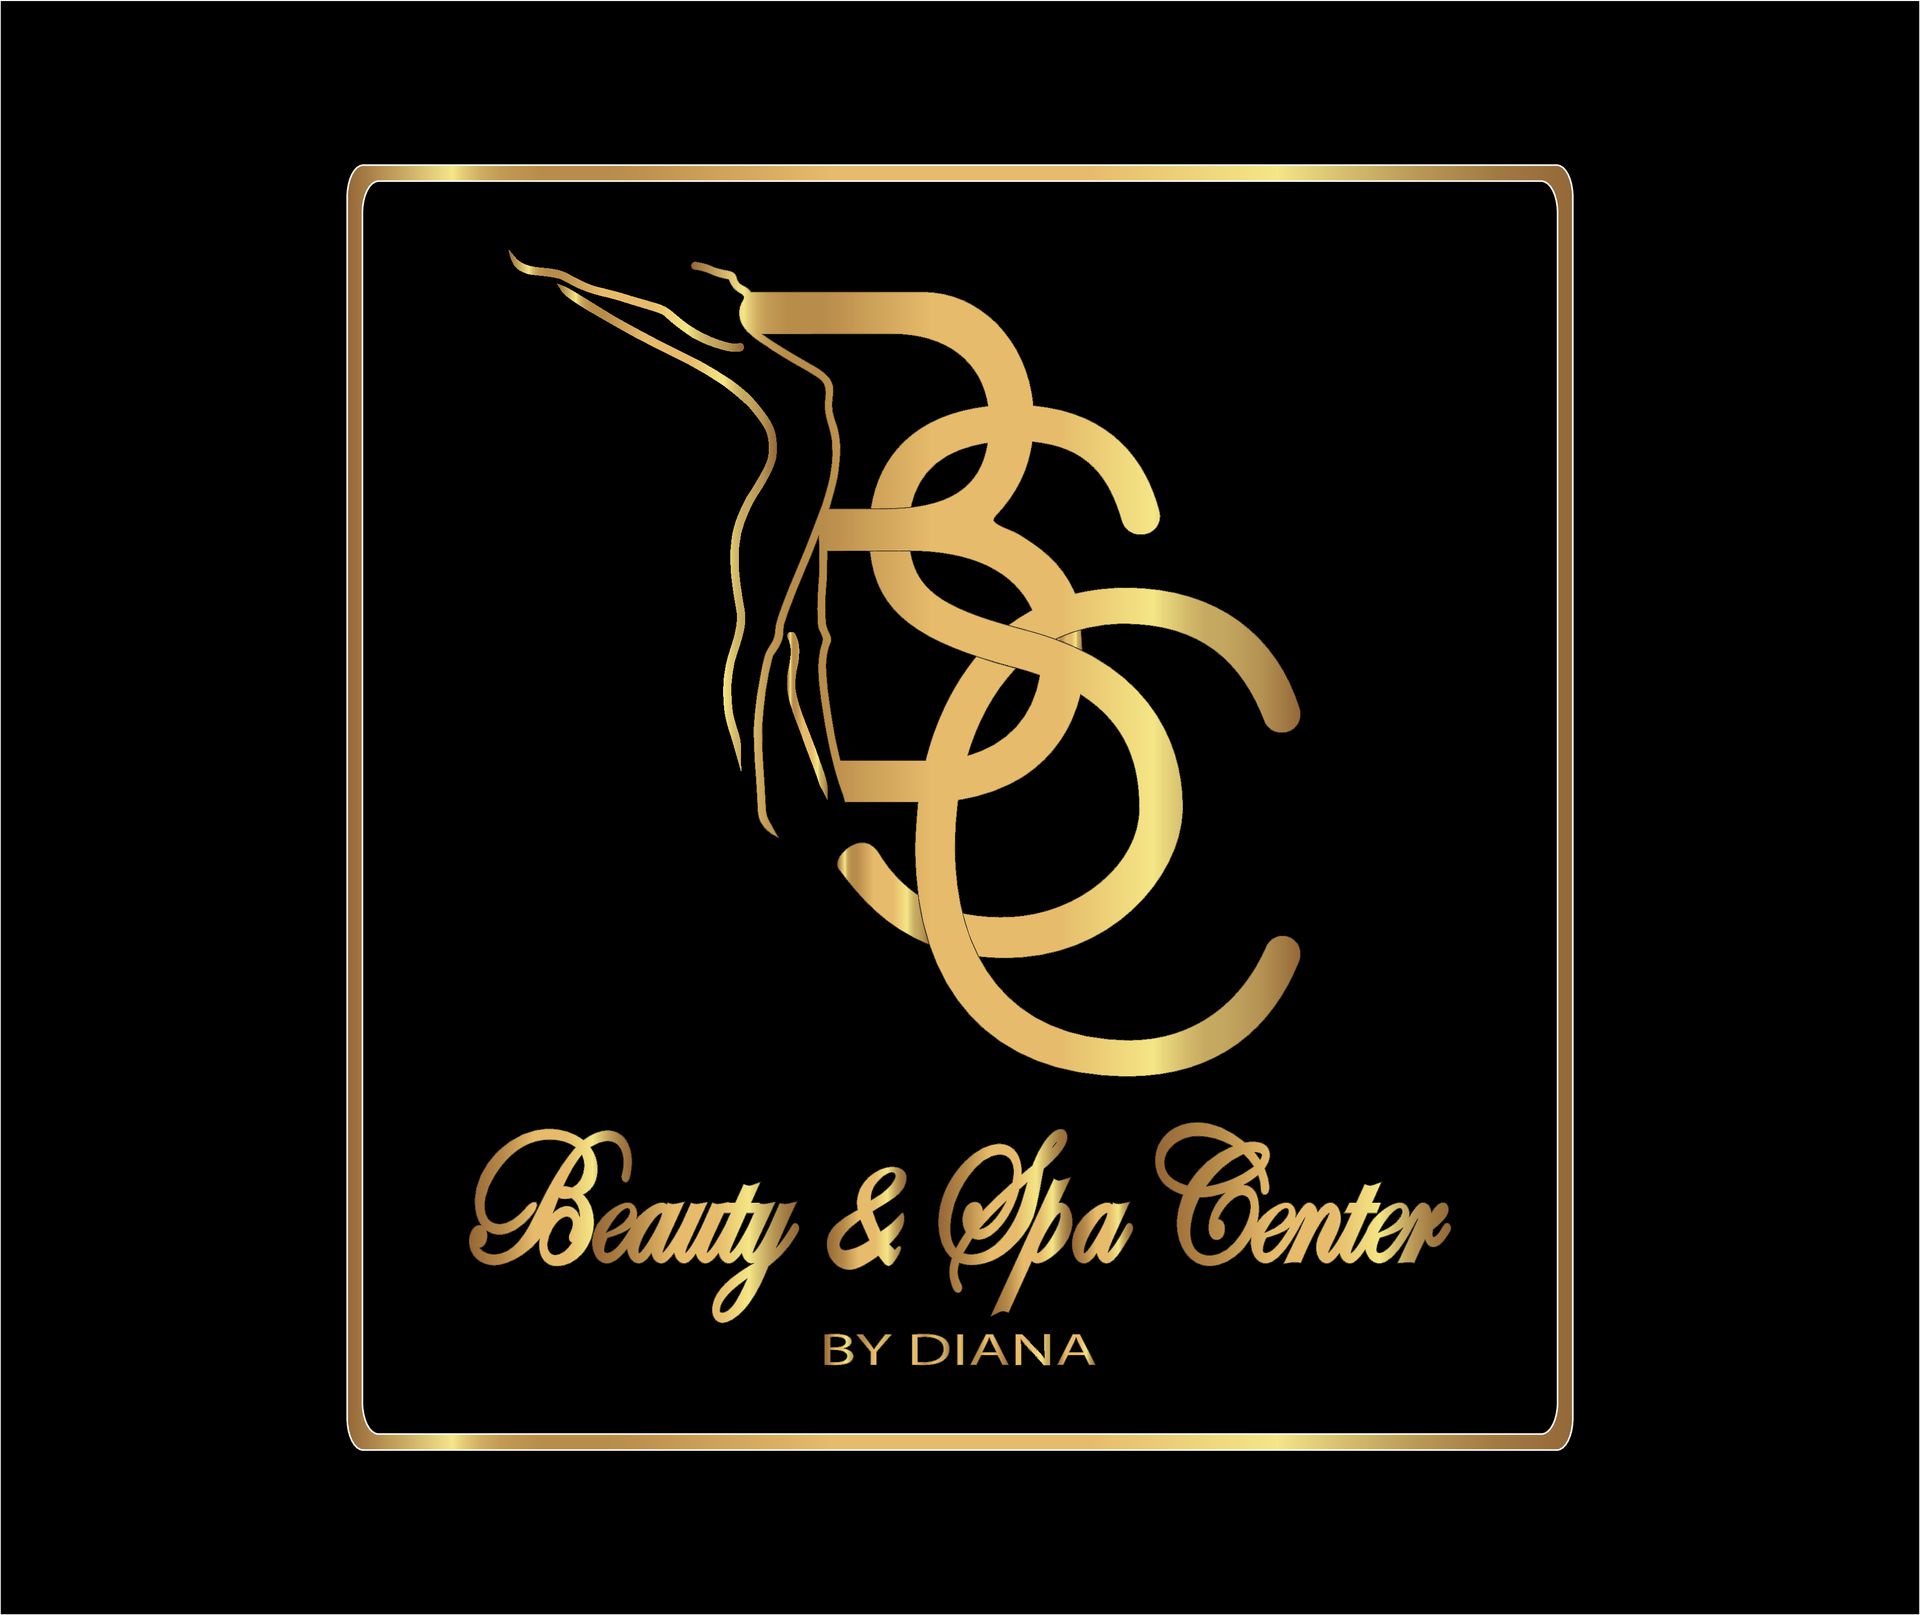 BEAUTY AND SPA CENTER BY DIANA